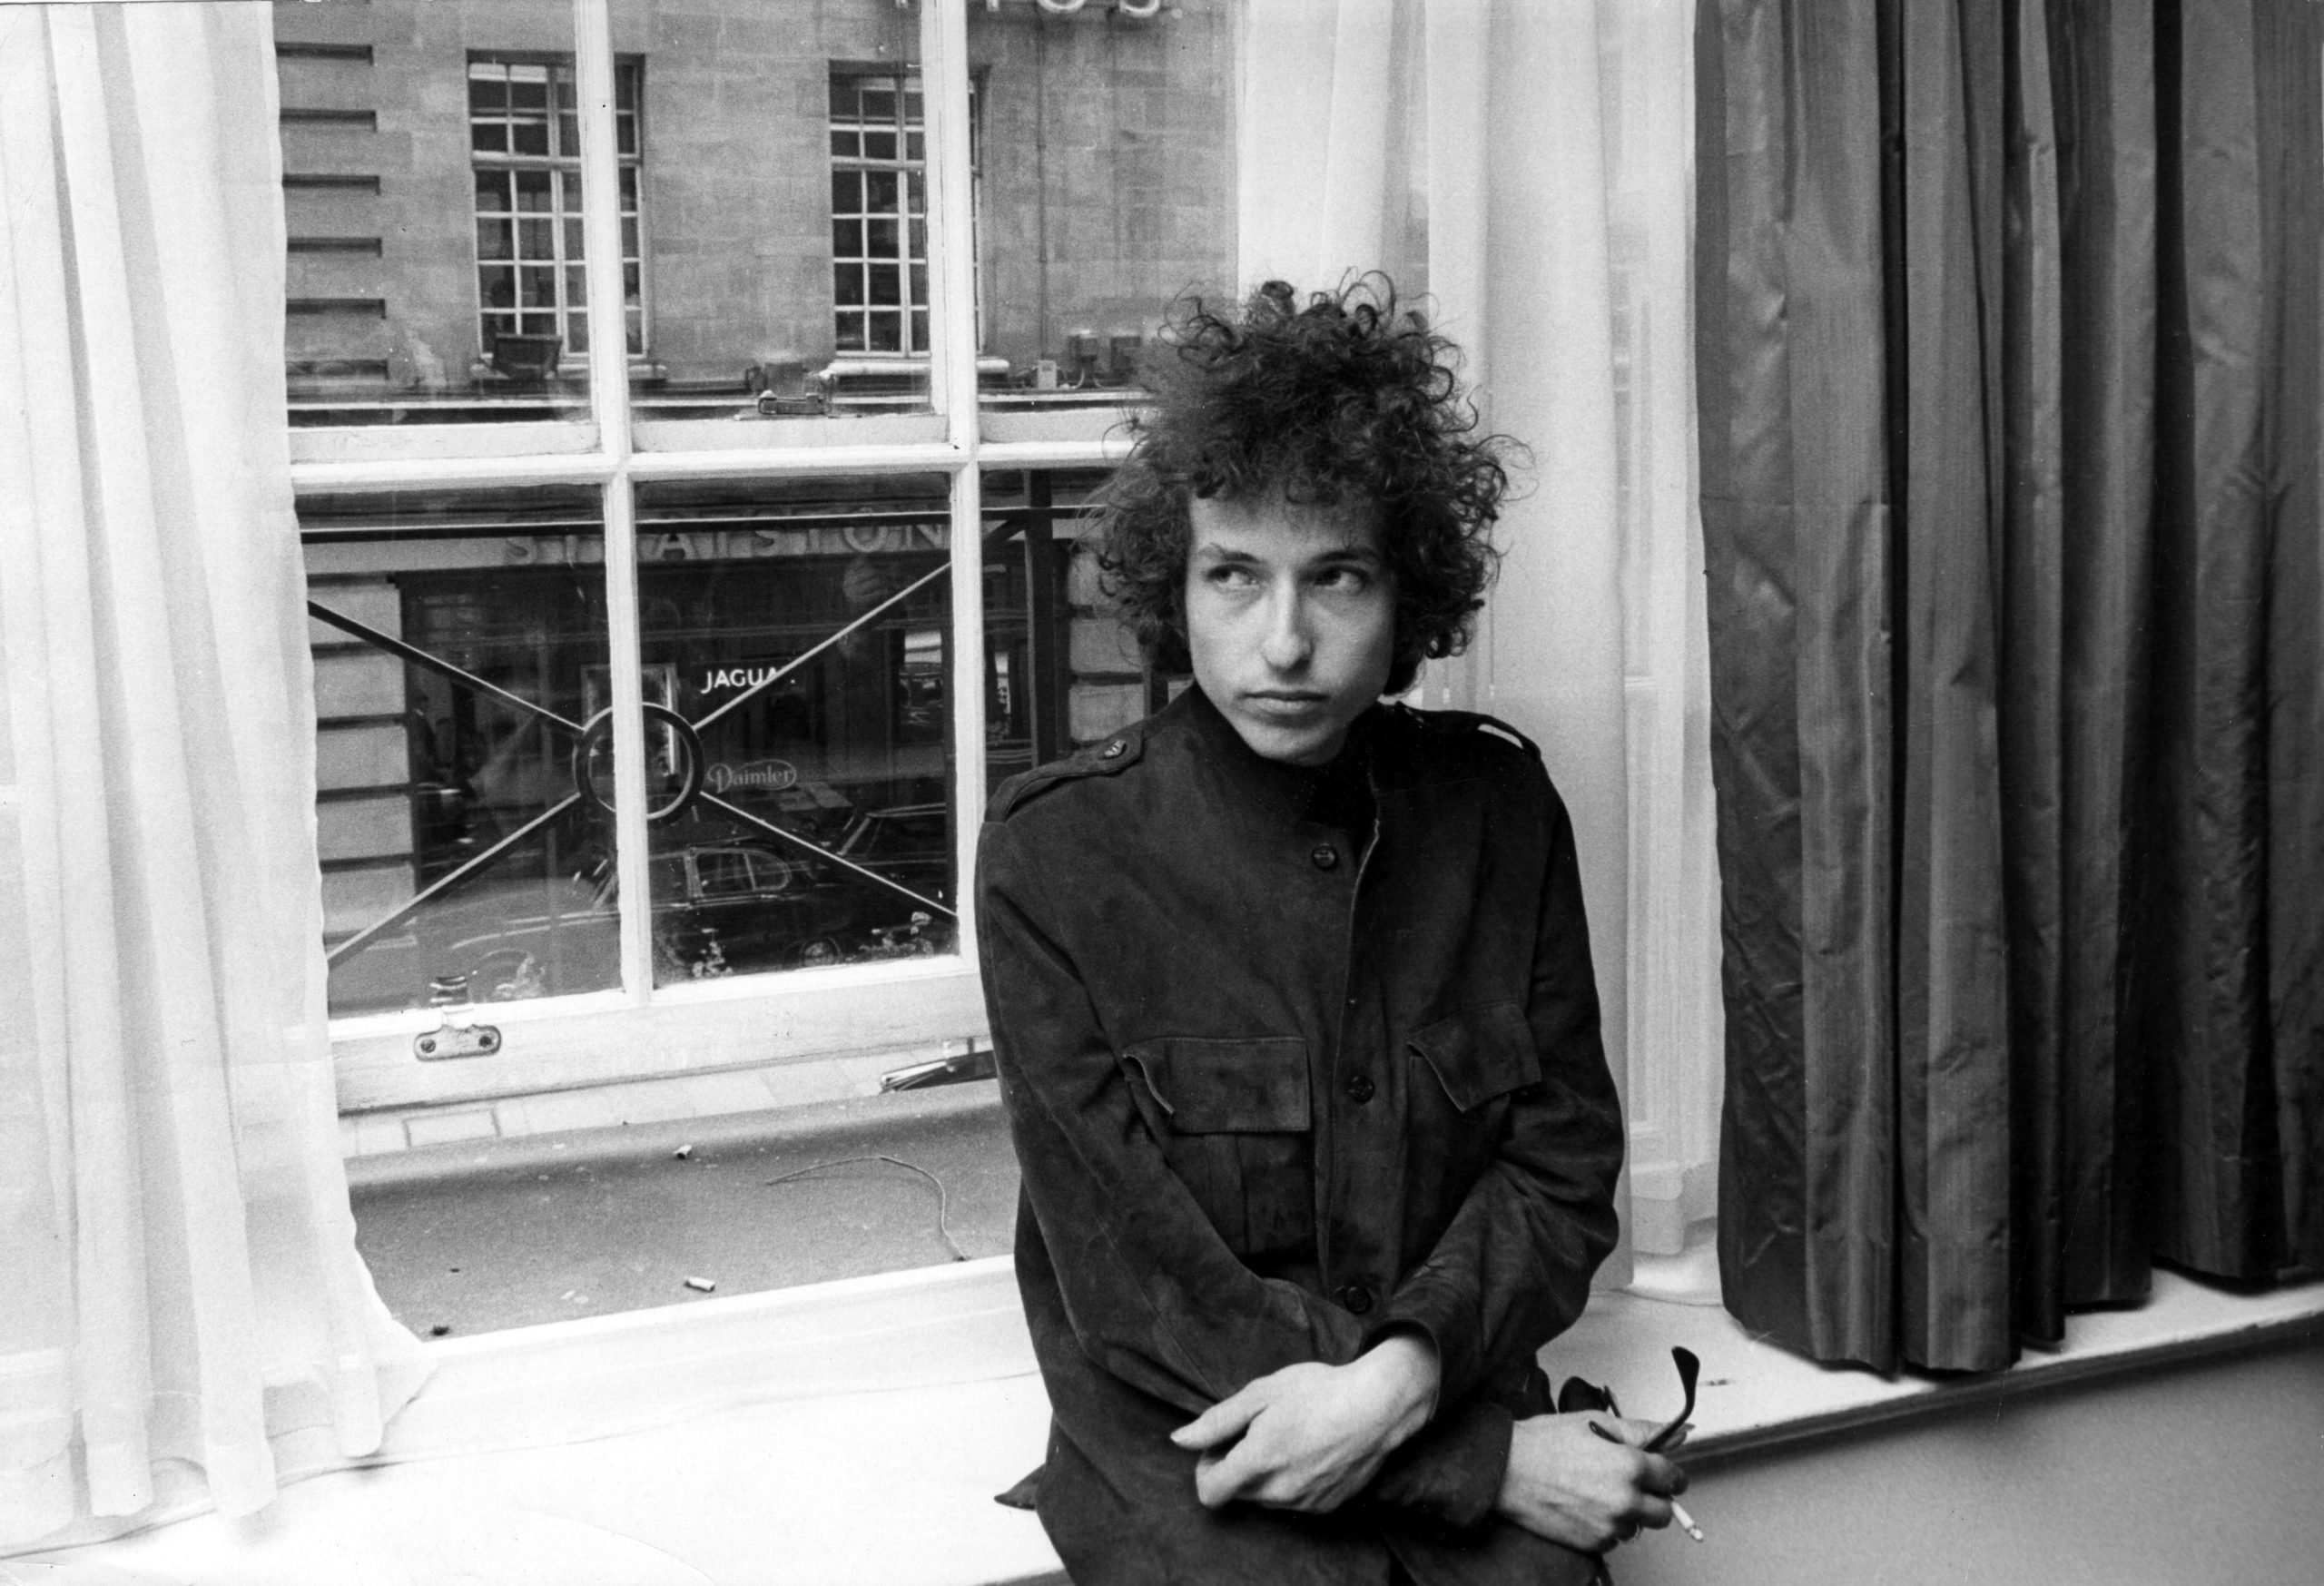 Bob Dylan Sells His Entire Songwriting Catalog to Universal Music